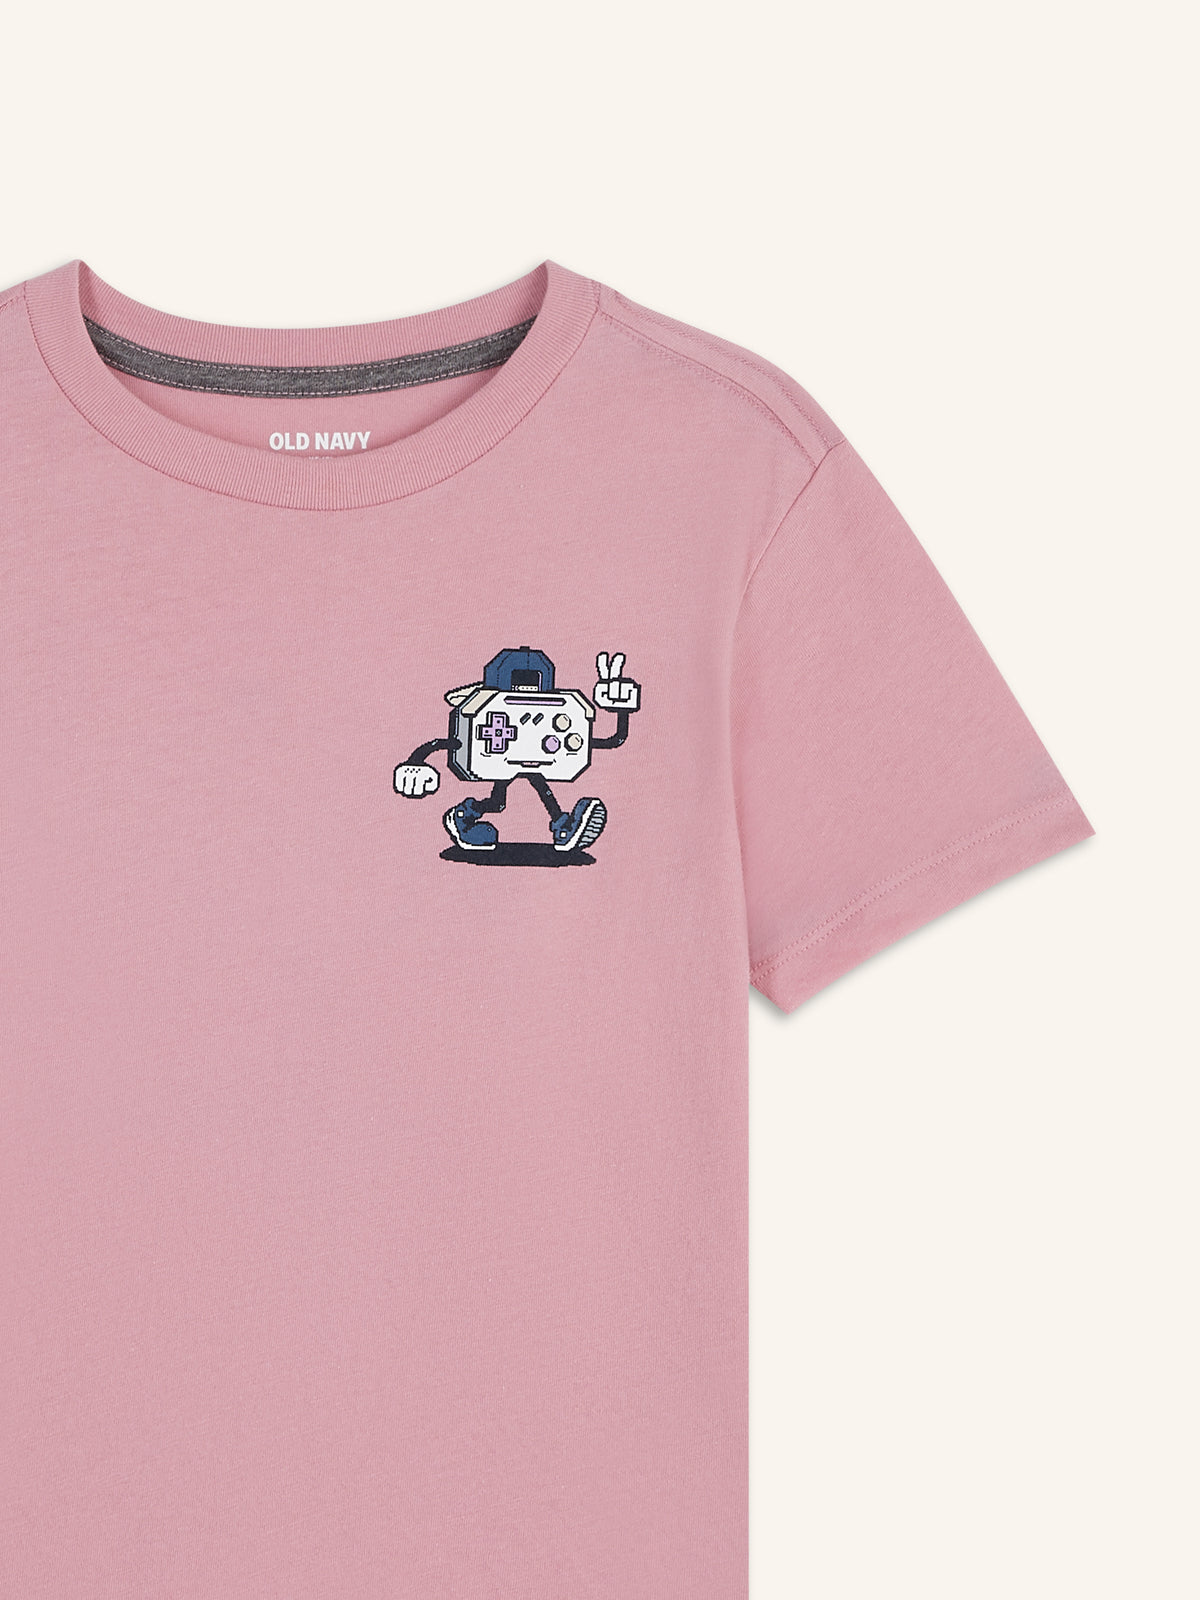 Graphic Crew-Neck T-Shirt for Boys